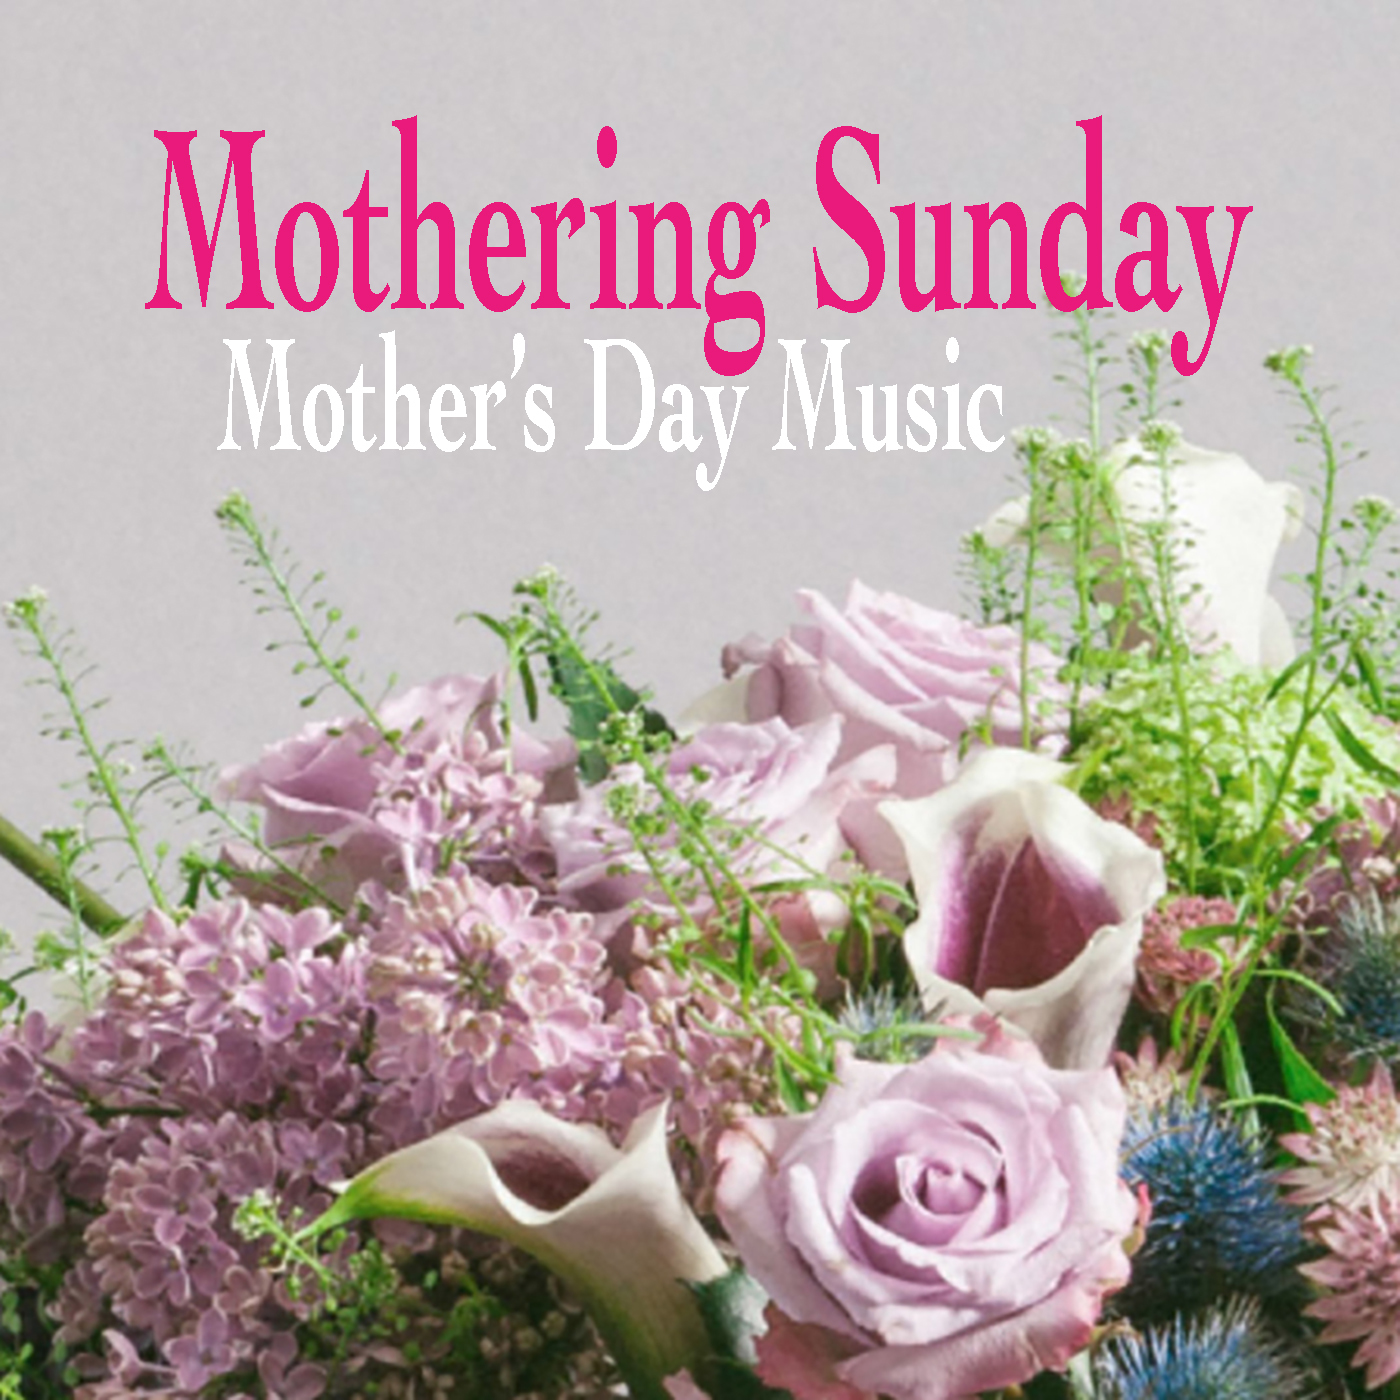 Mothering Sunday Mother's Day Music